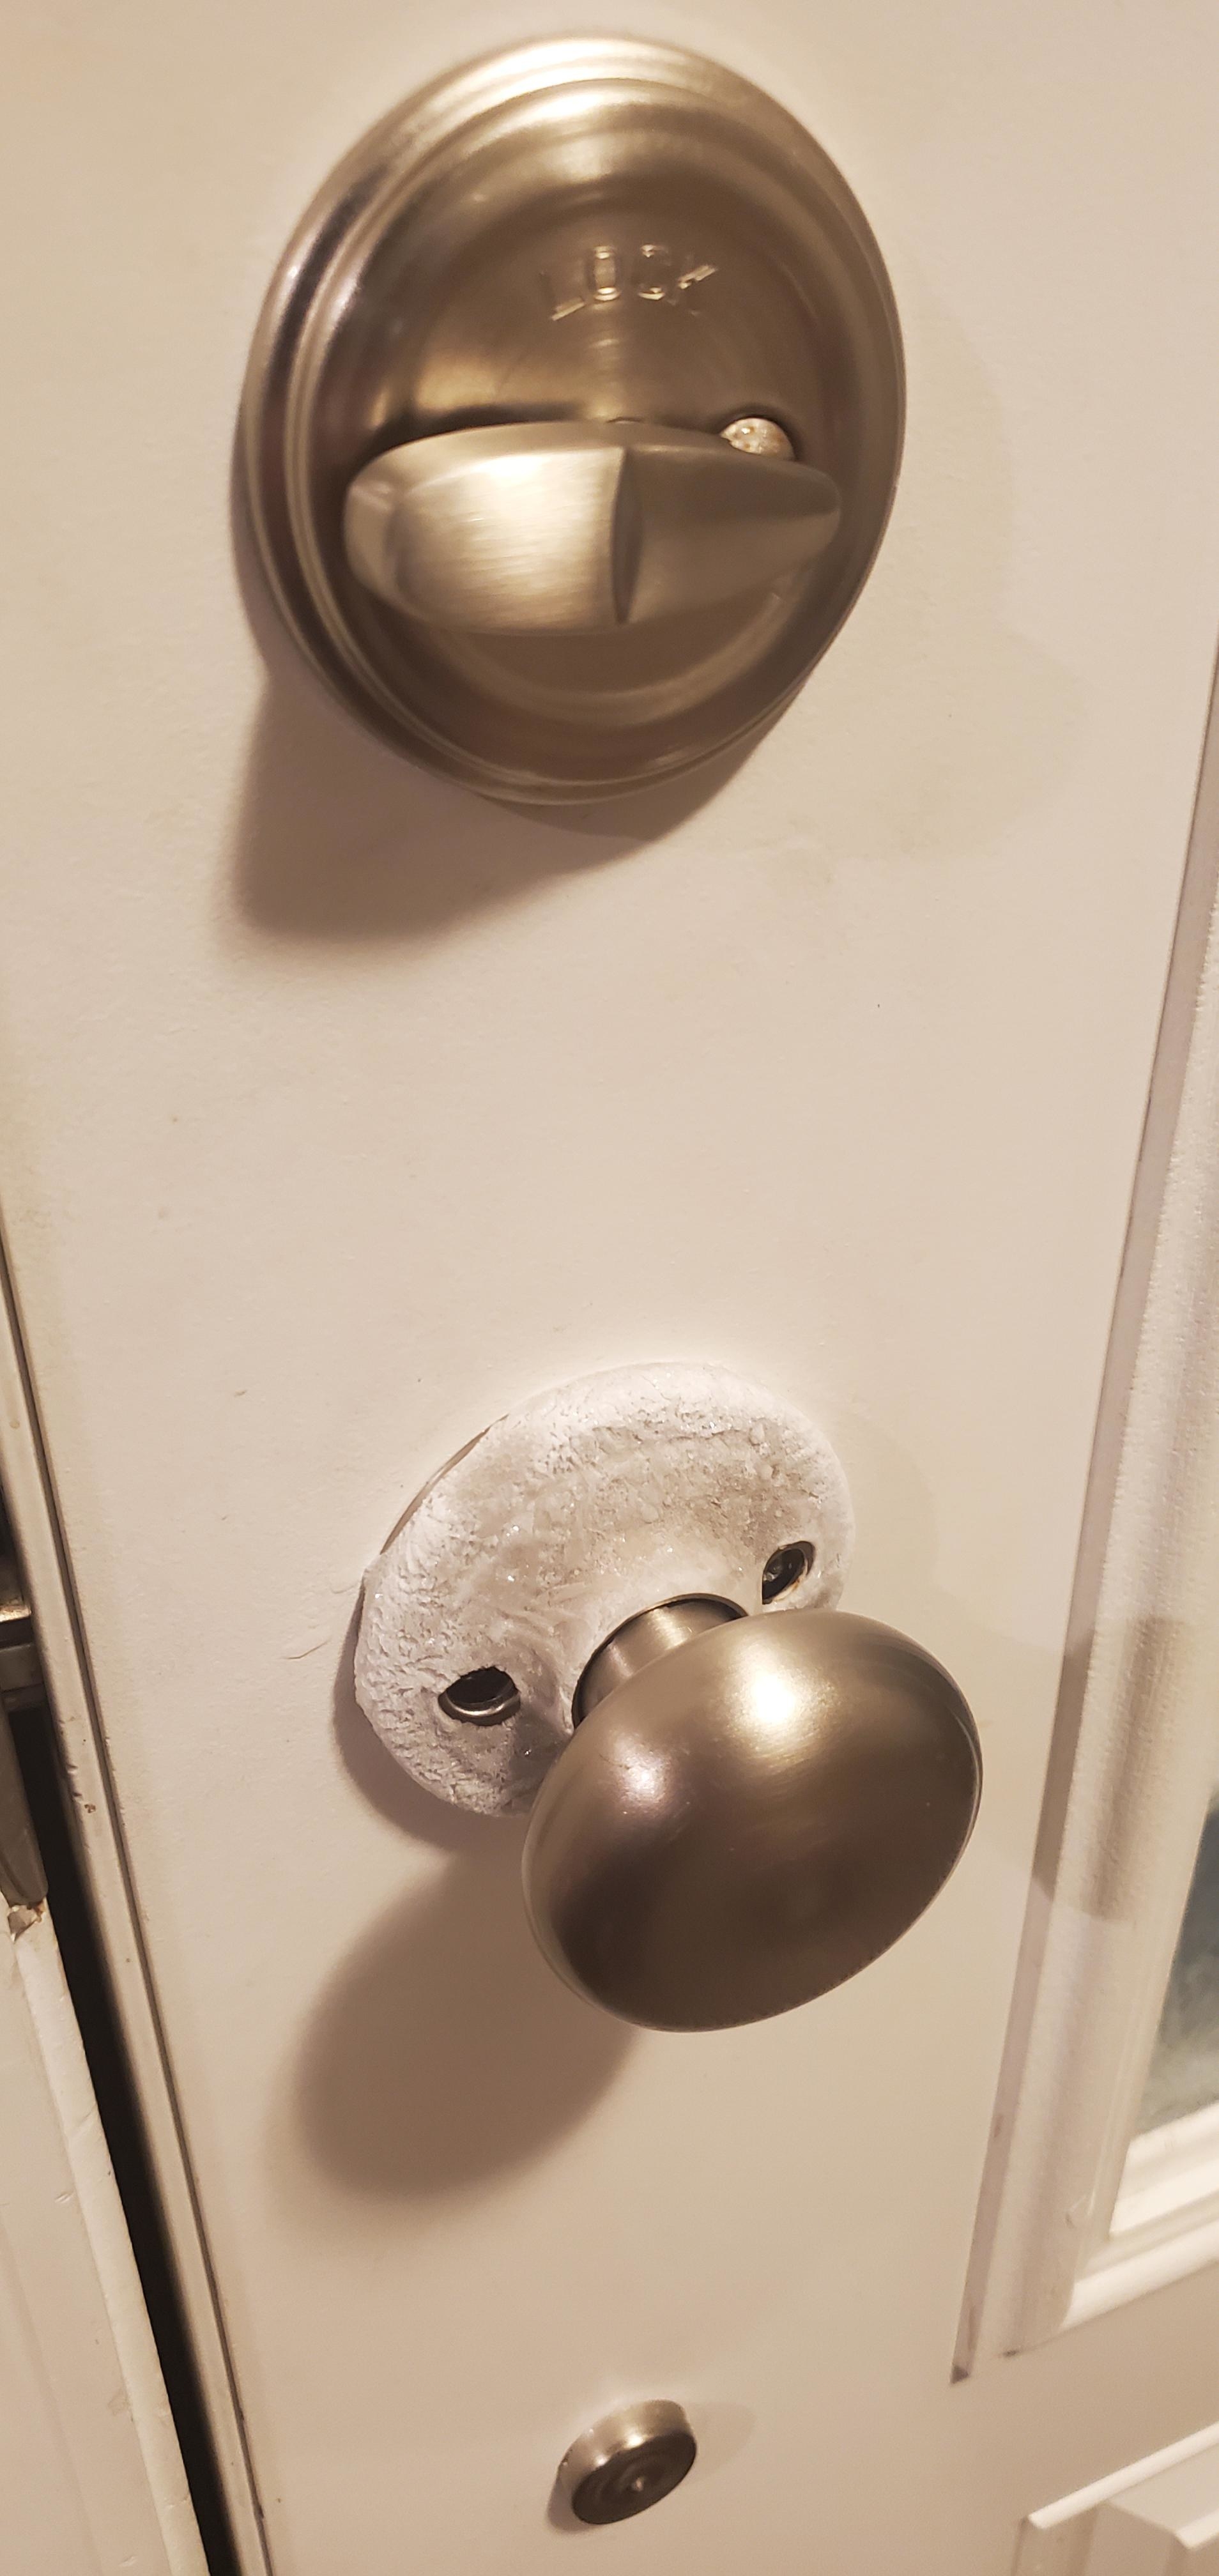 Close-up of doorknob with frost on it